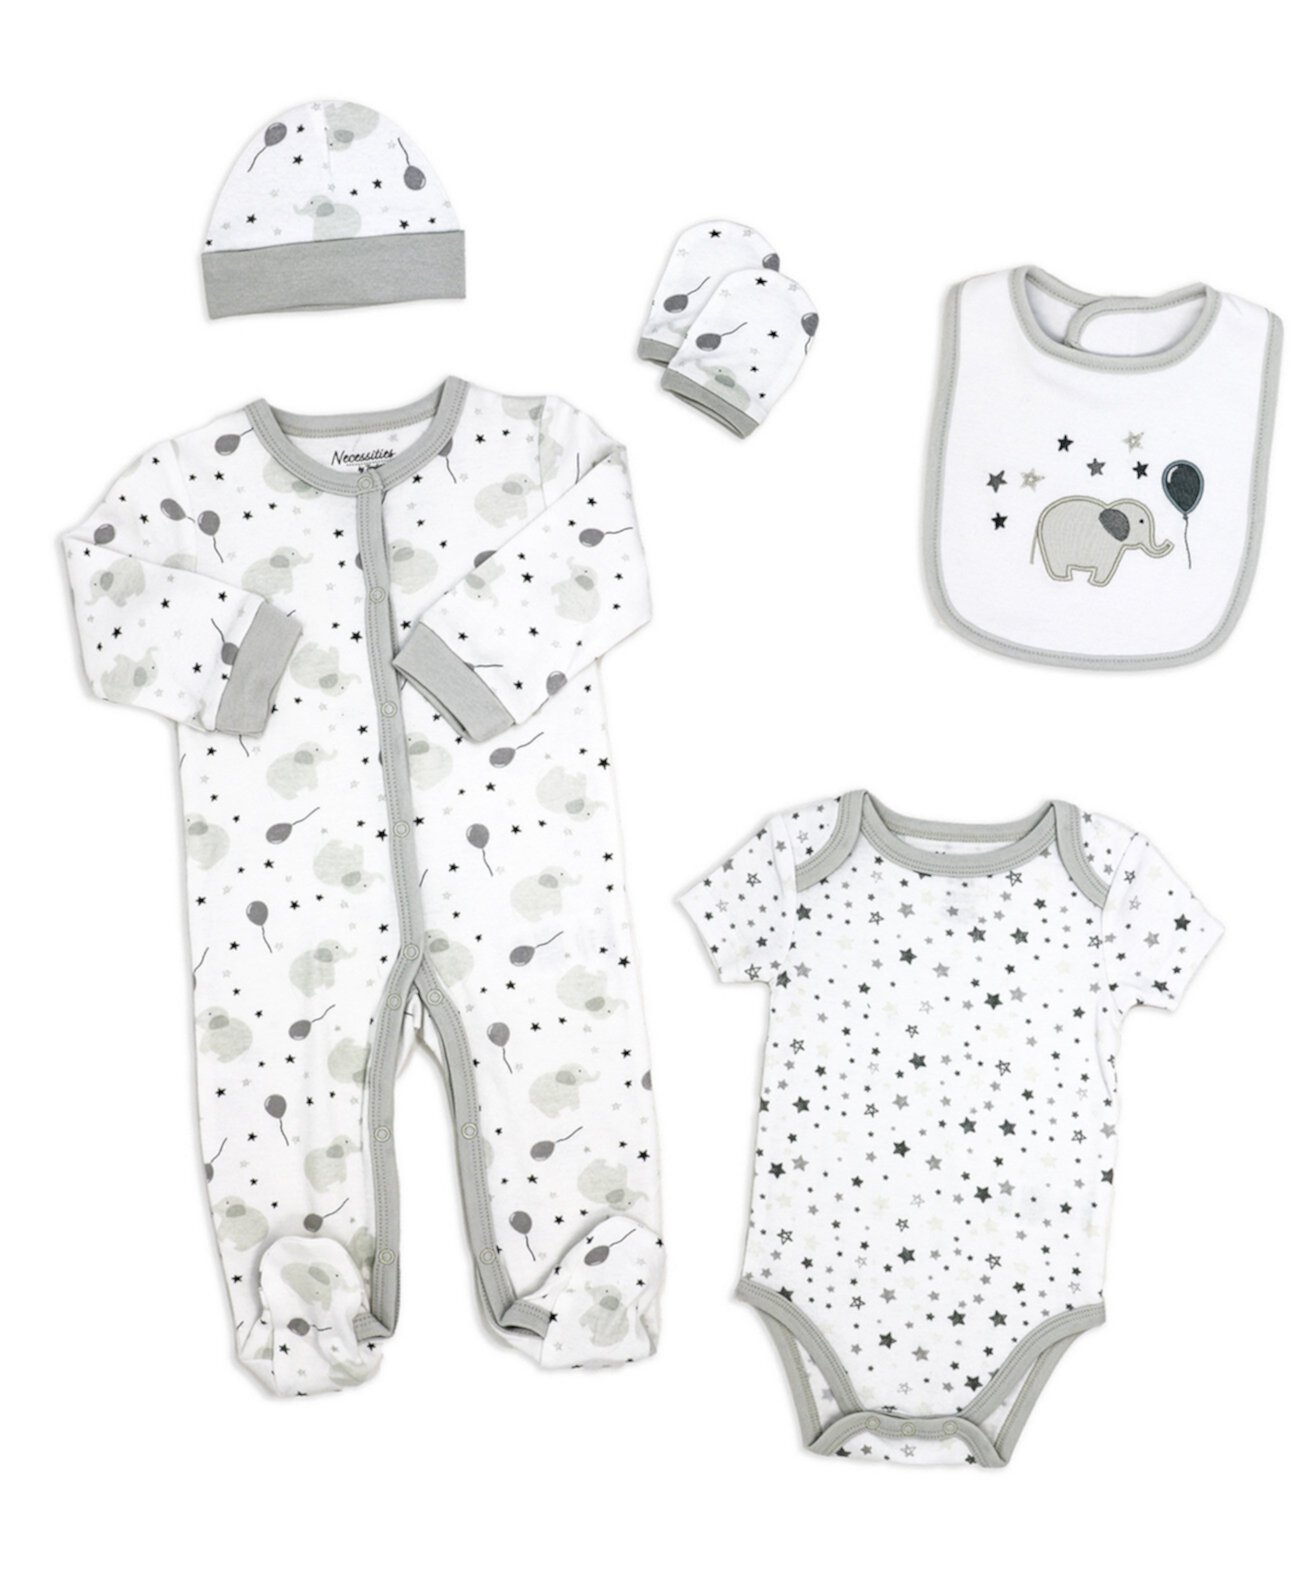 Baby Boy and Baby Girl Elephants and Balloons 5 Piece Layette Set Tendertyme